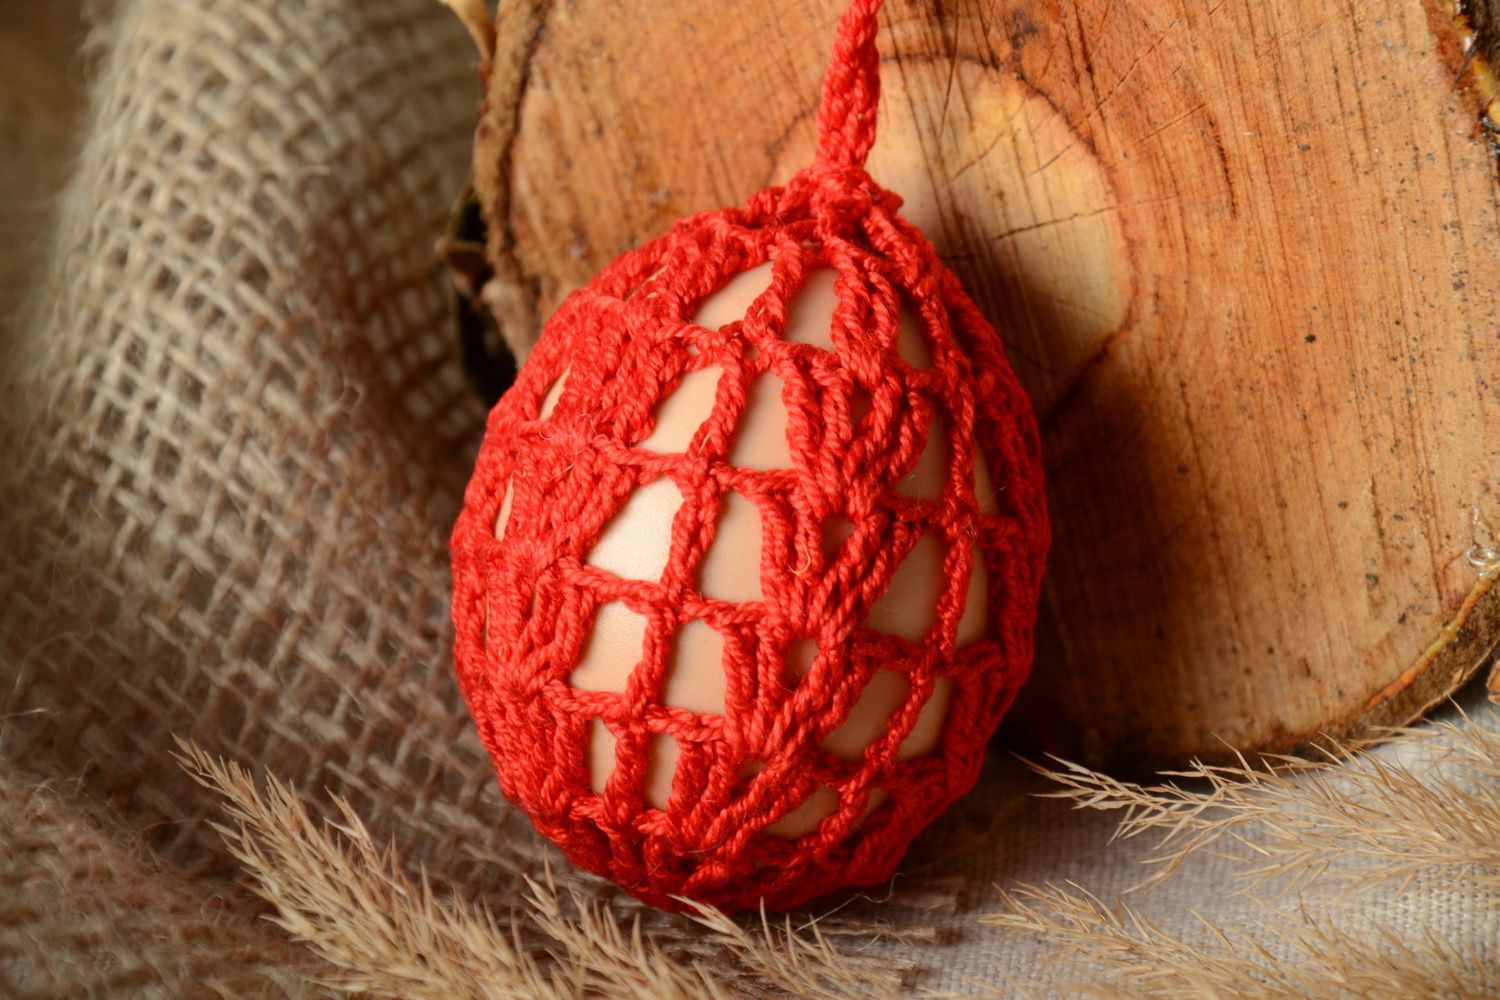 Homemade red decorative Easter egg woven over with threads photo 1